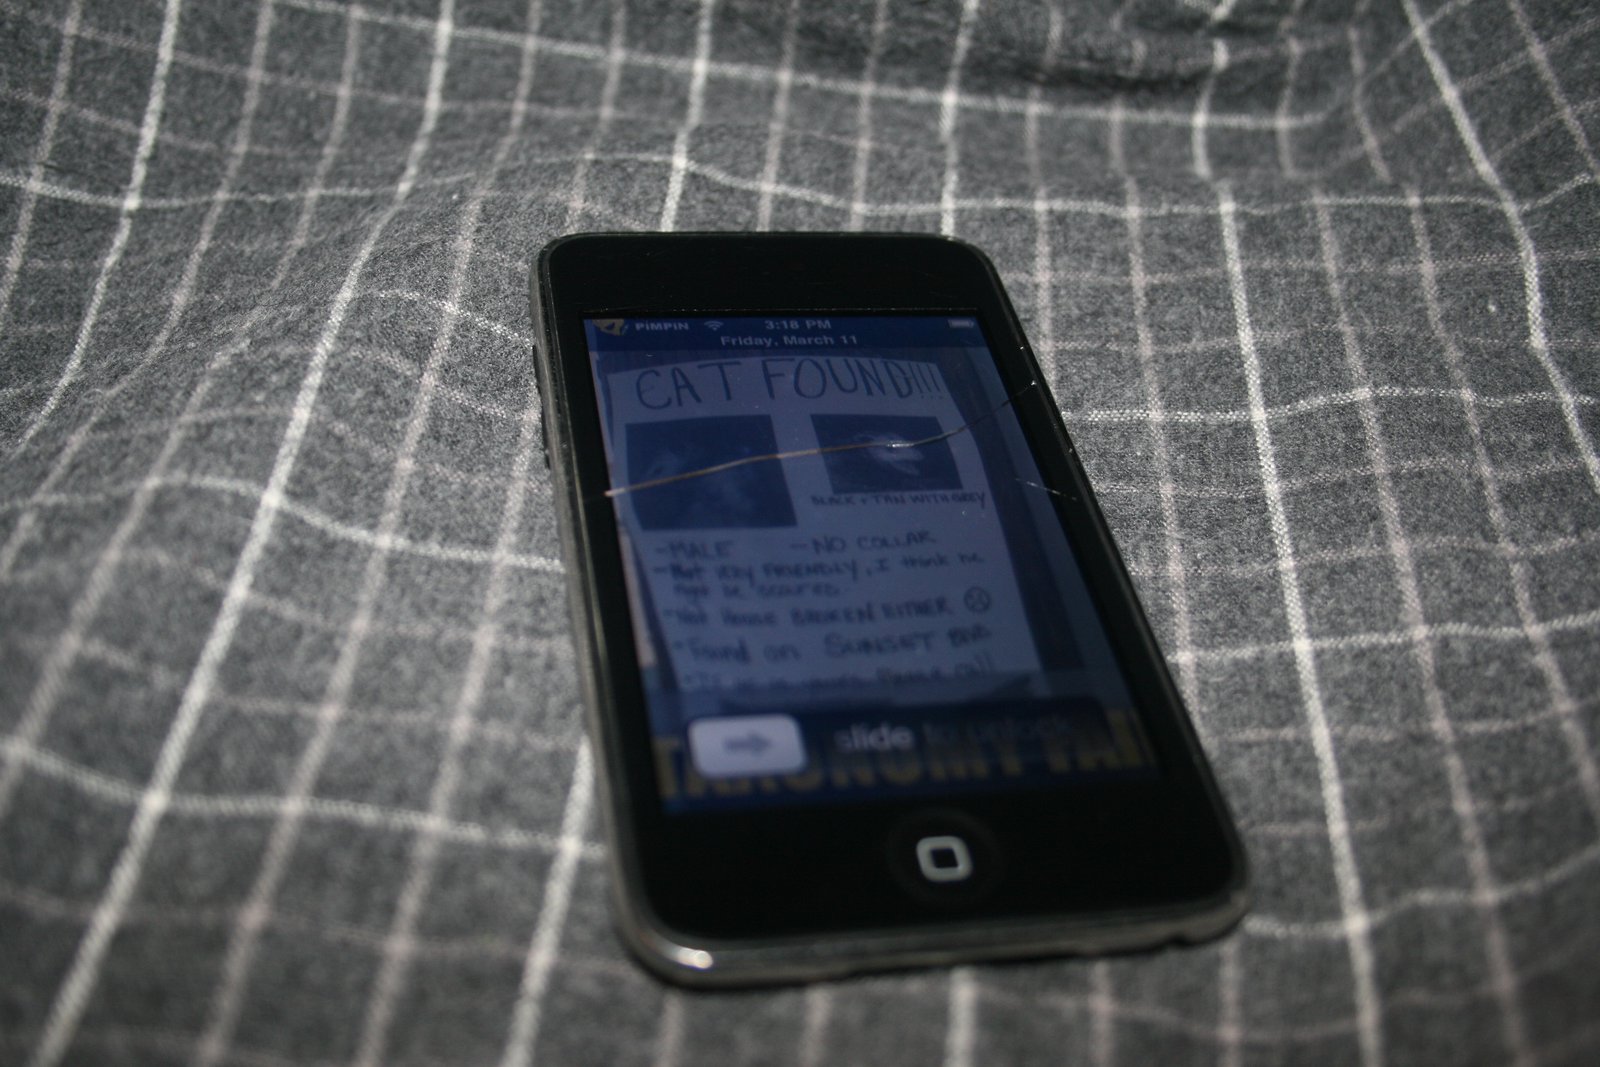 IPOD touch jailbroken 8gb for sale thread